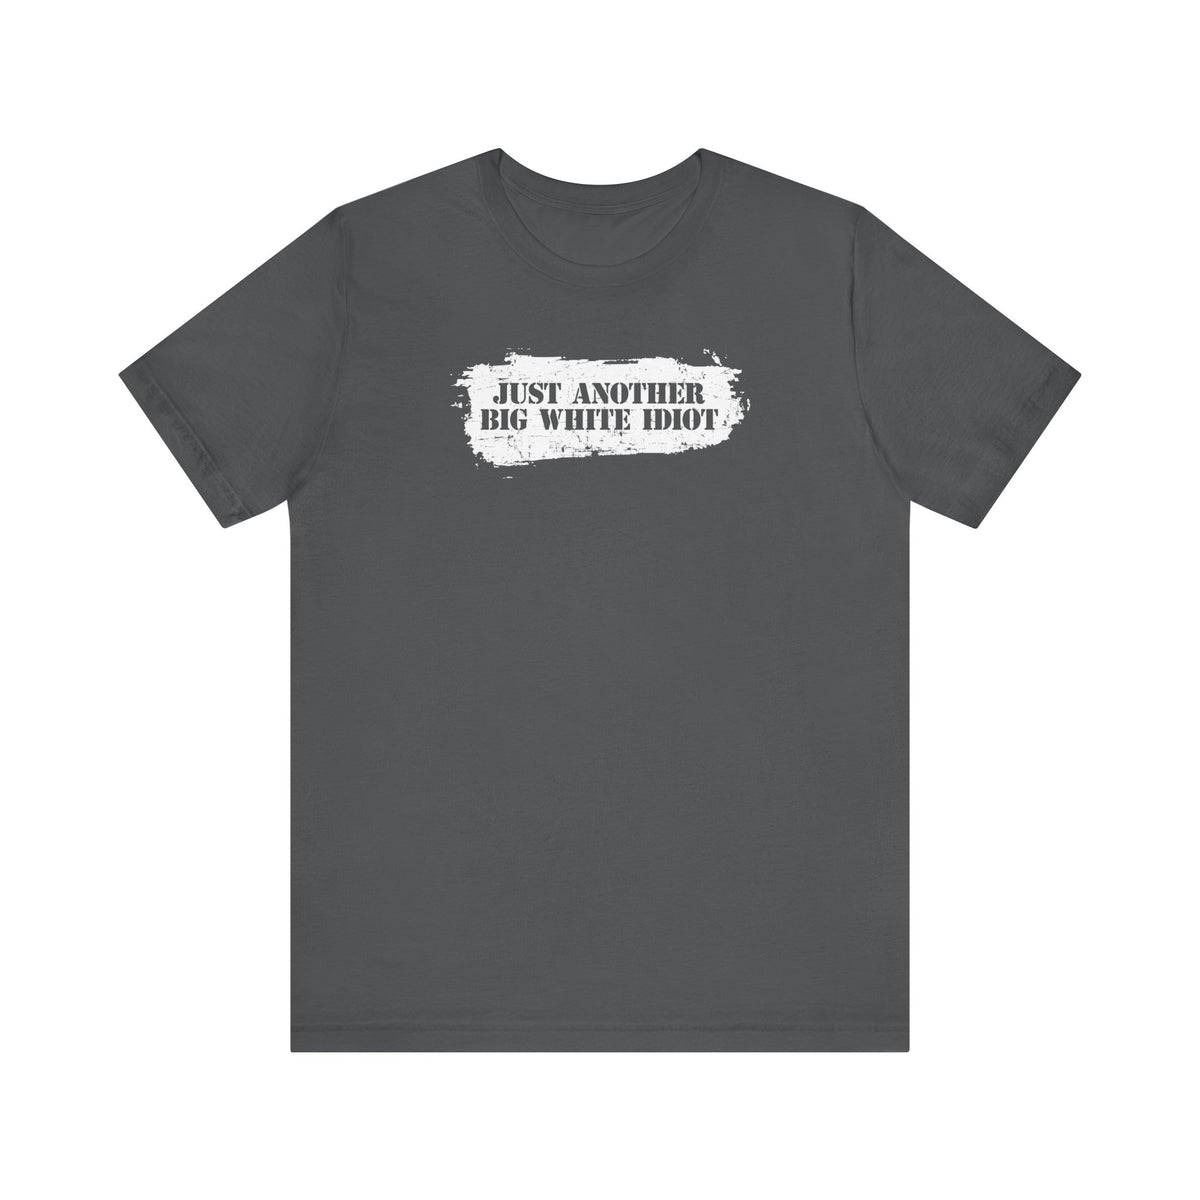 Just Another Big White Idiot - Men's T-Shirt